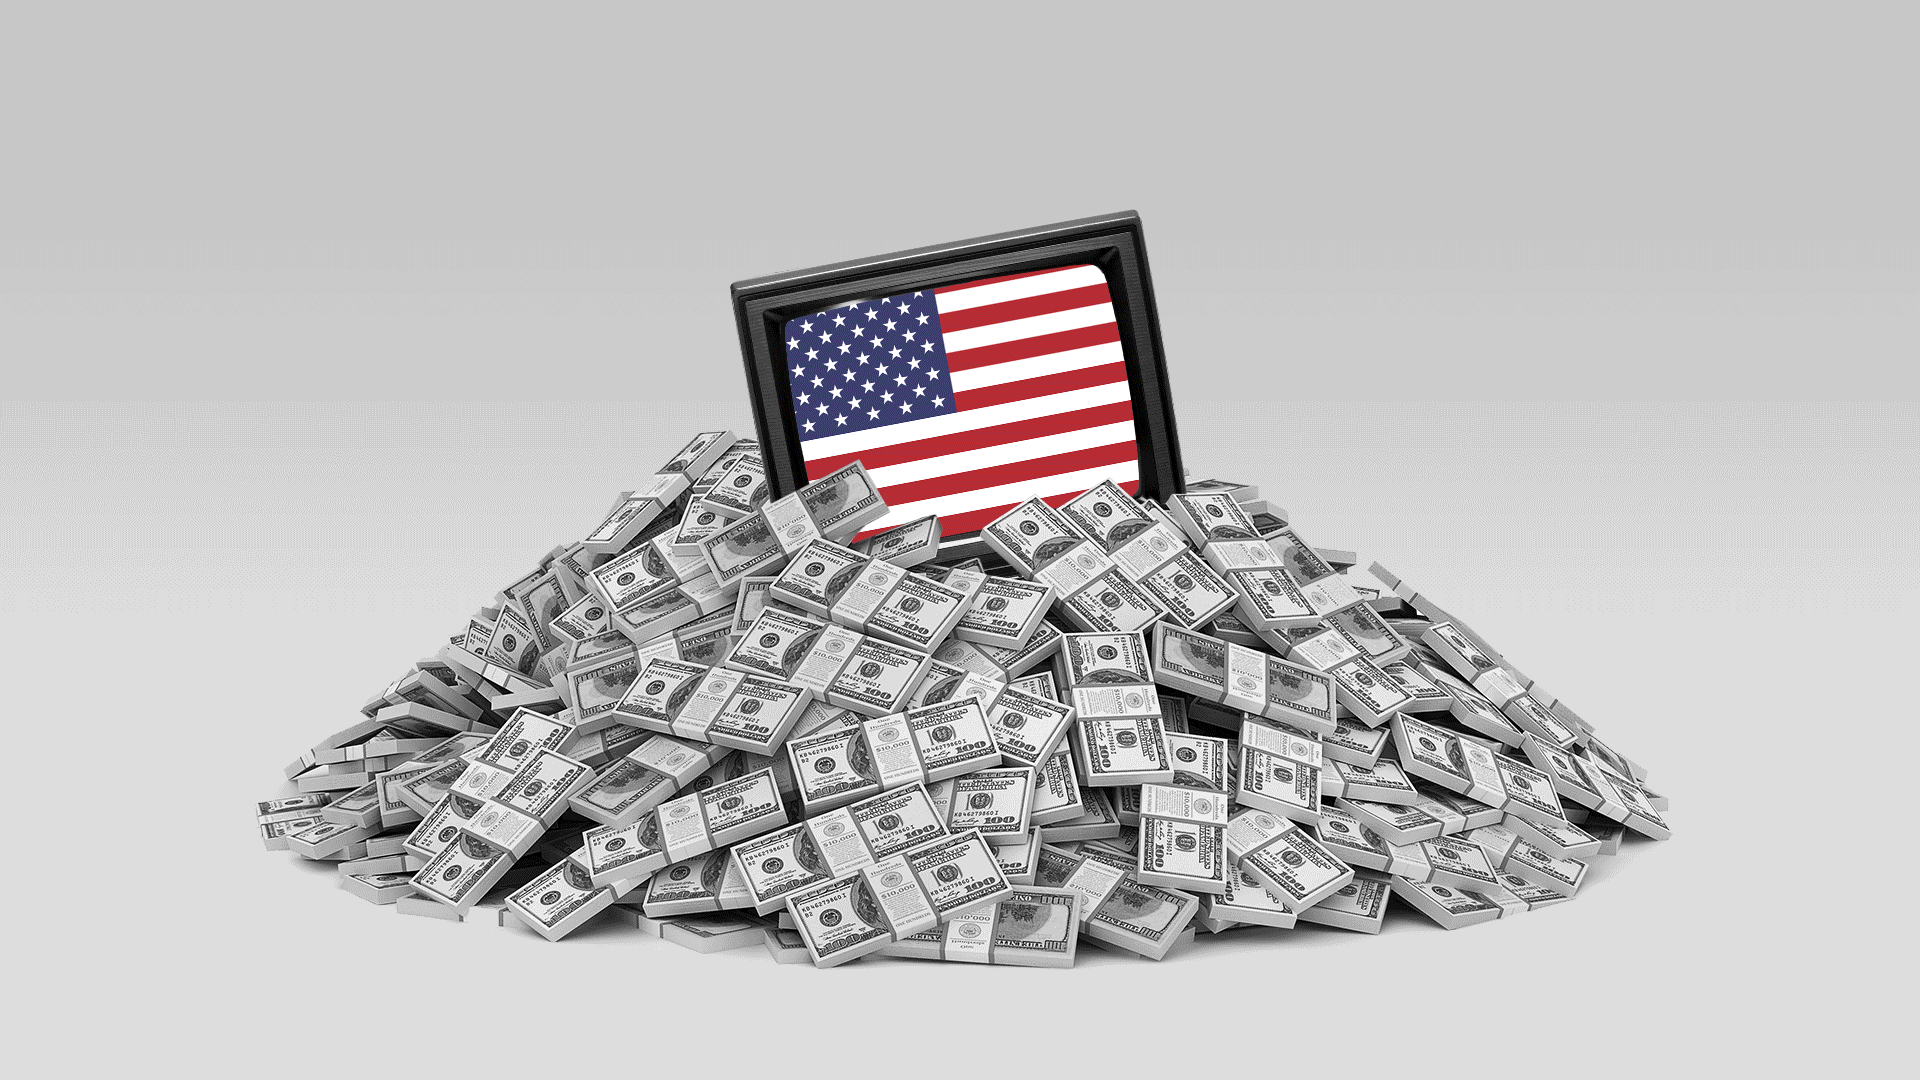 A broken television screen with the US flag sits on top a pile of money.